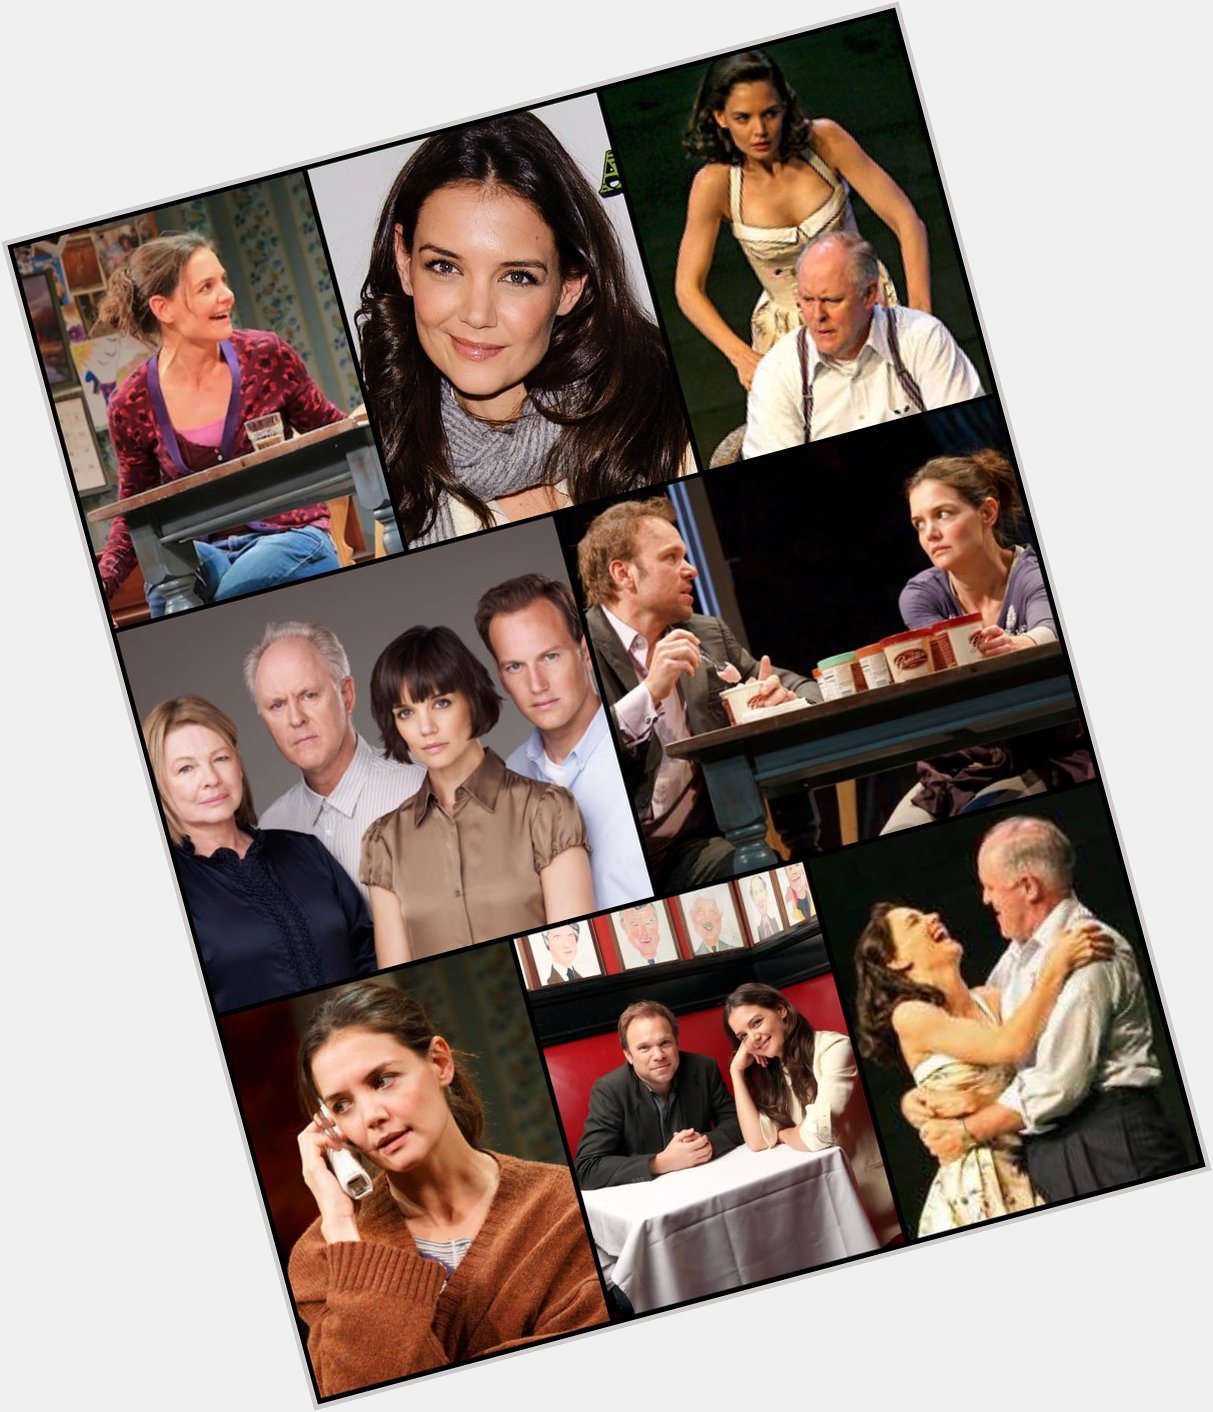 Sending out a Happy Birthday to Katie Holmes, who starred on Broadway in All My Sons and Dead Accounts! 